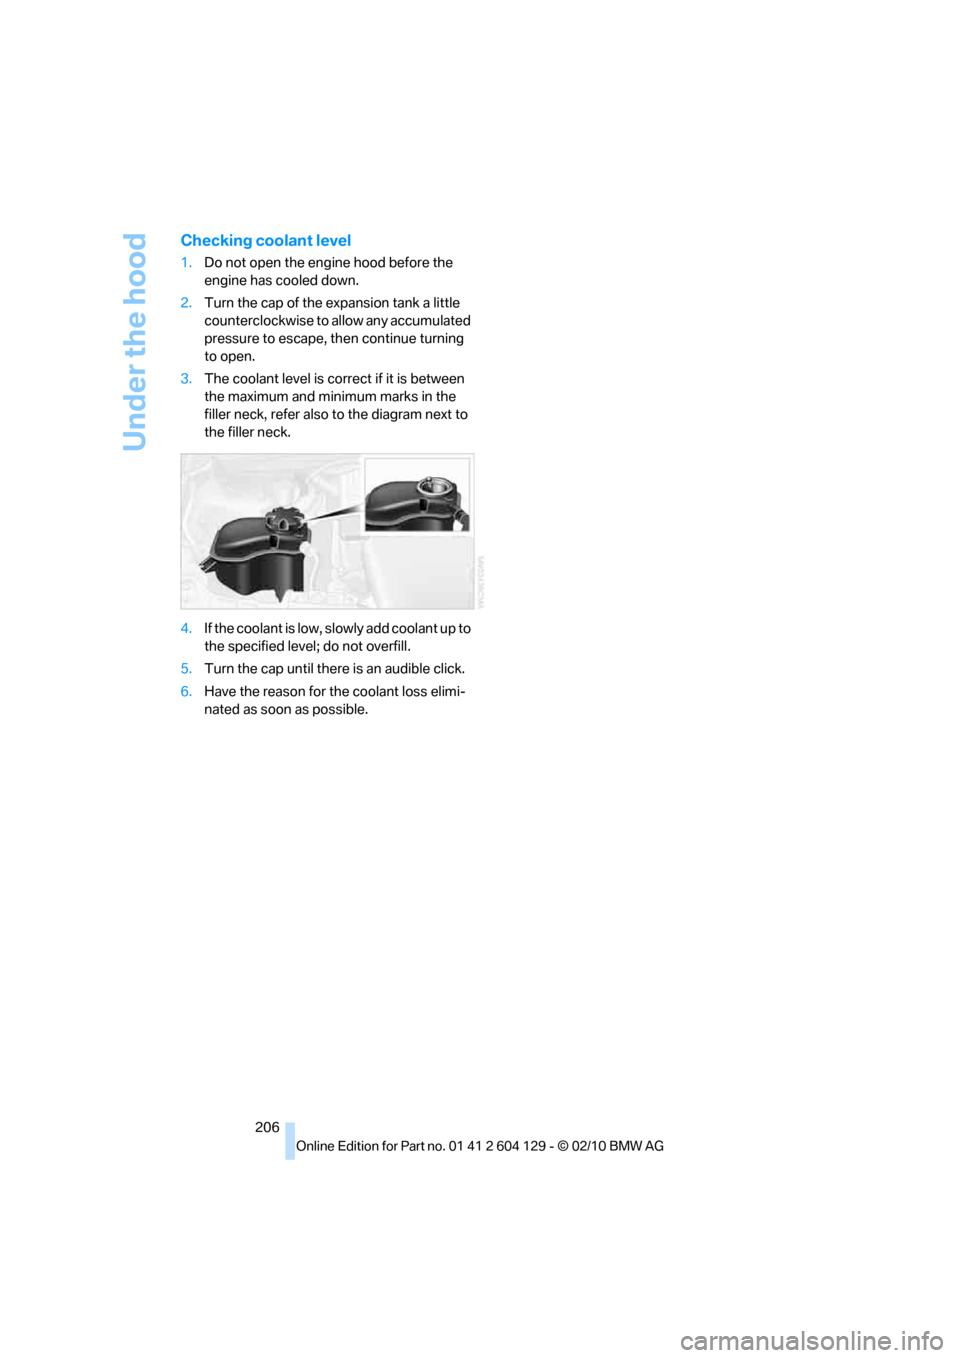 BMW 128I COUPE 2011 E82 User Guide Under the hood
206
Checking coolant level
1.Do not open the engine hood before the 
engine has cooled down.
2.Turn the cap of the expansion tank a little 
counterclockwise to allow any accumulated 
pr